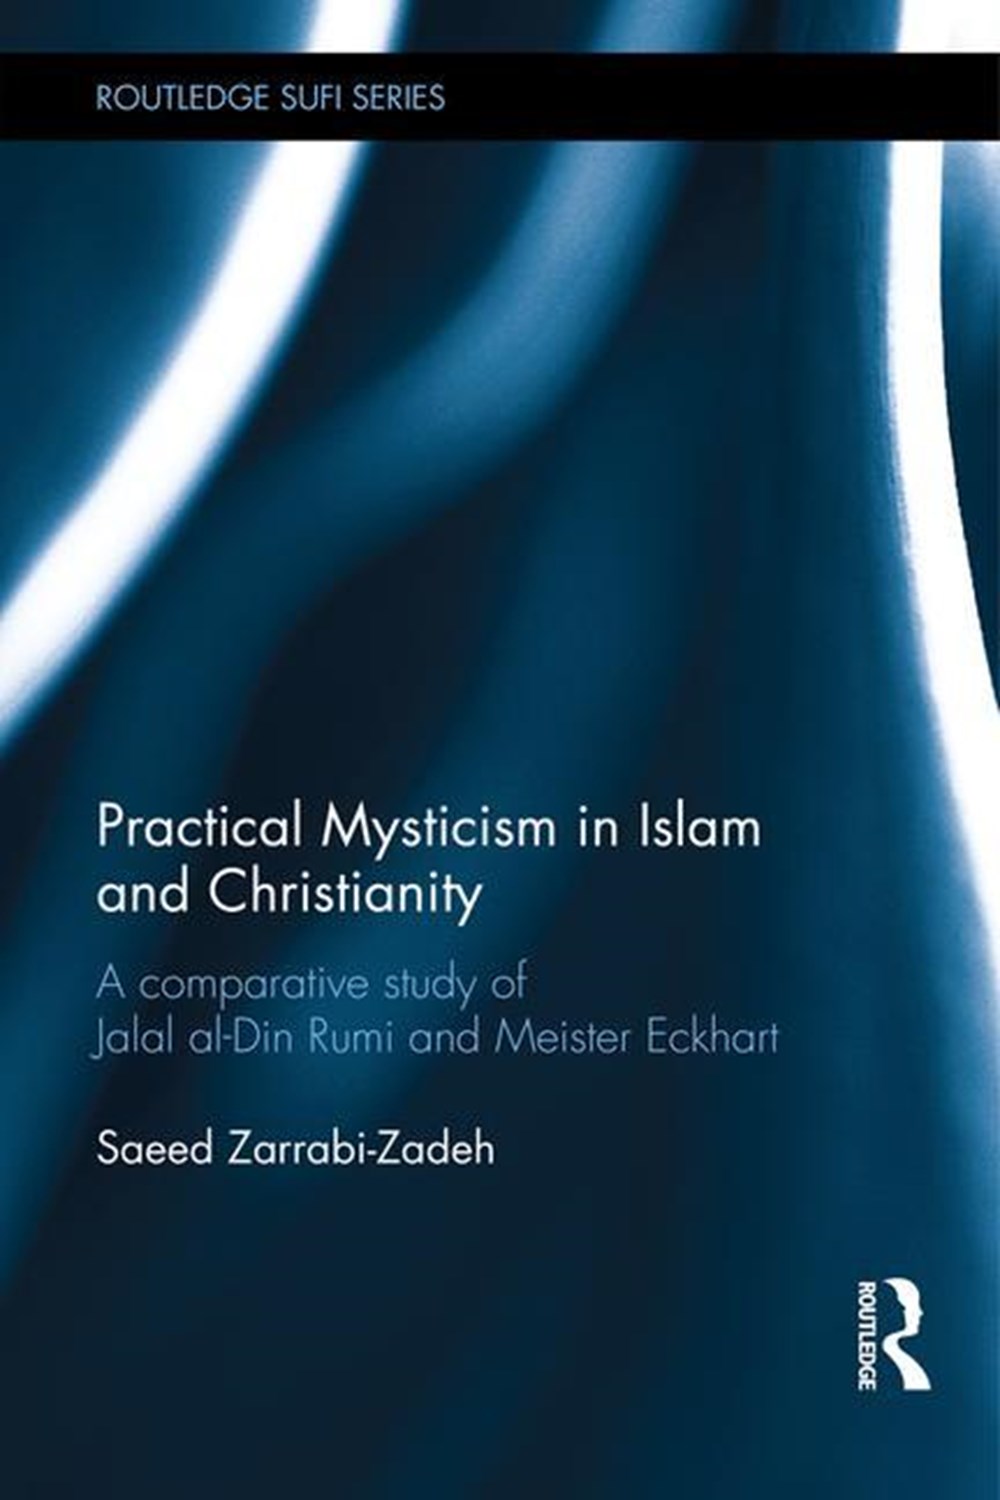 Practical Mysticism in Islam and Christianity: A Comparative Study of Jalal al-Din Rumi and Meister 